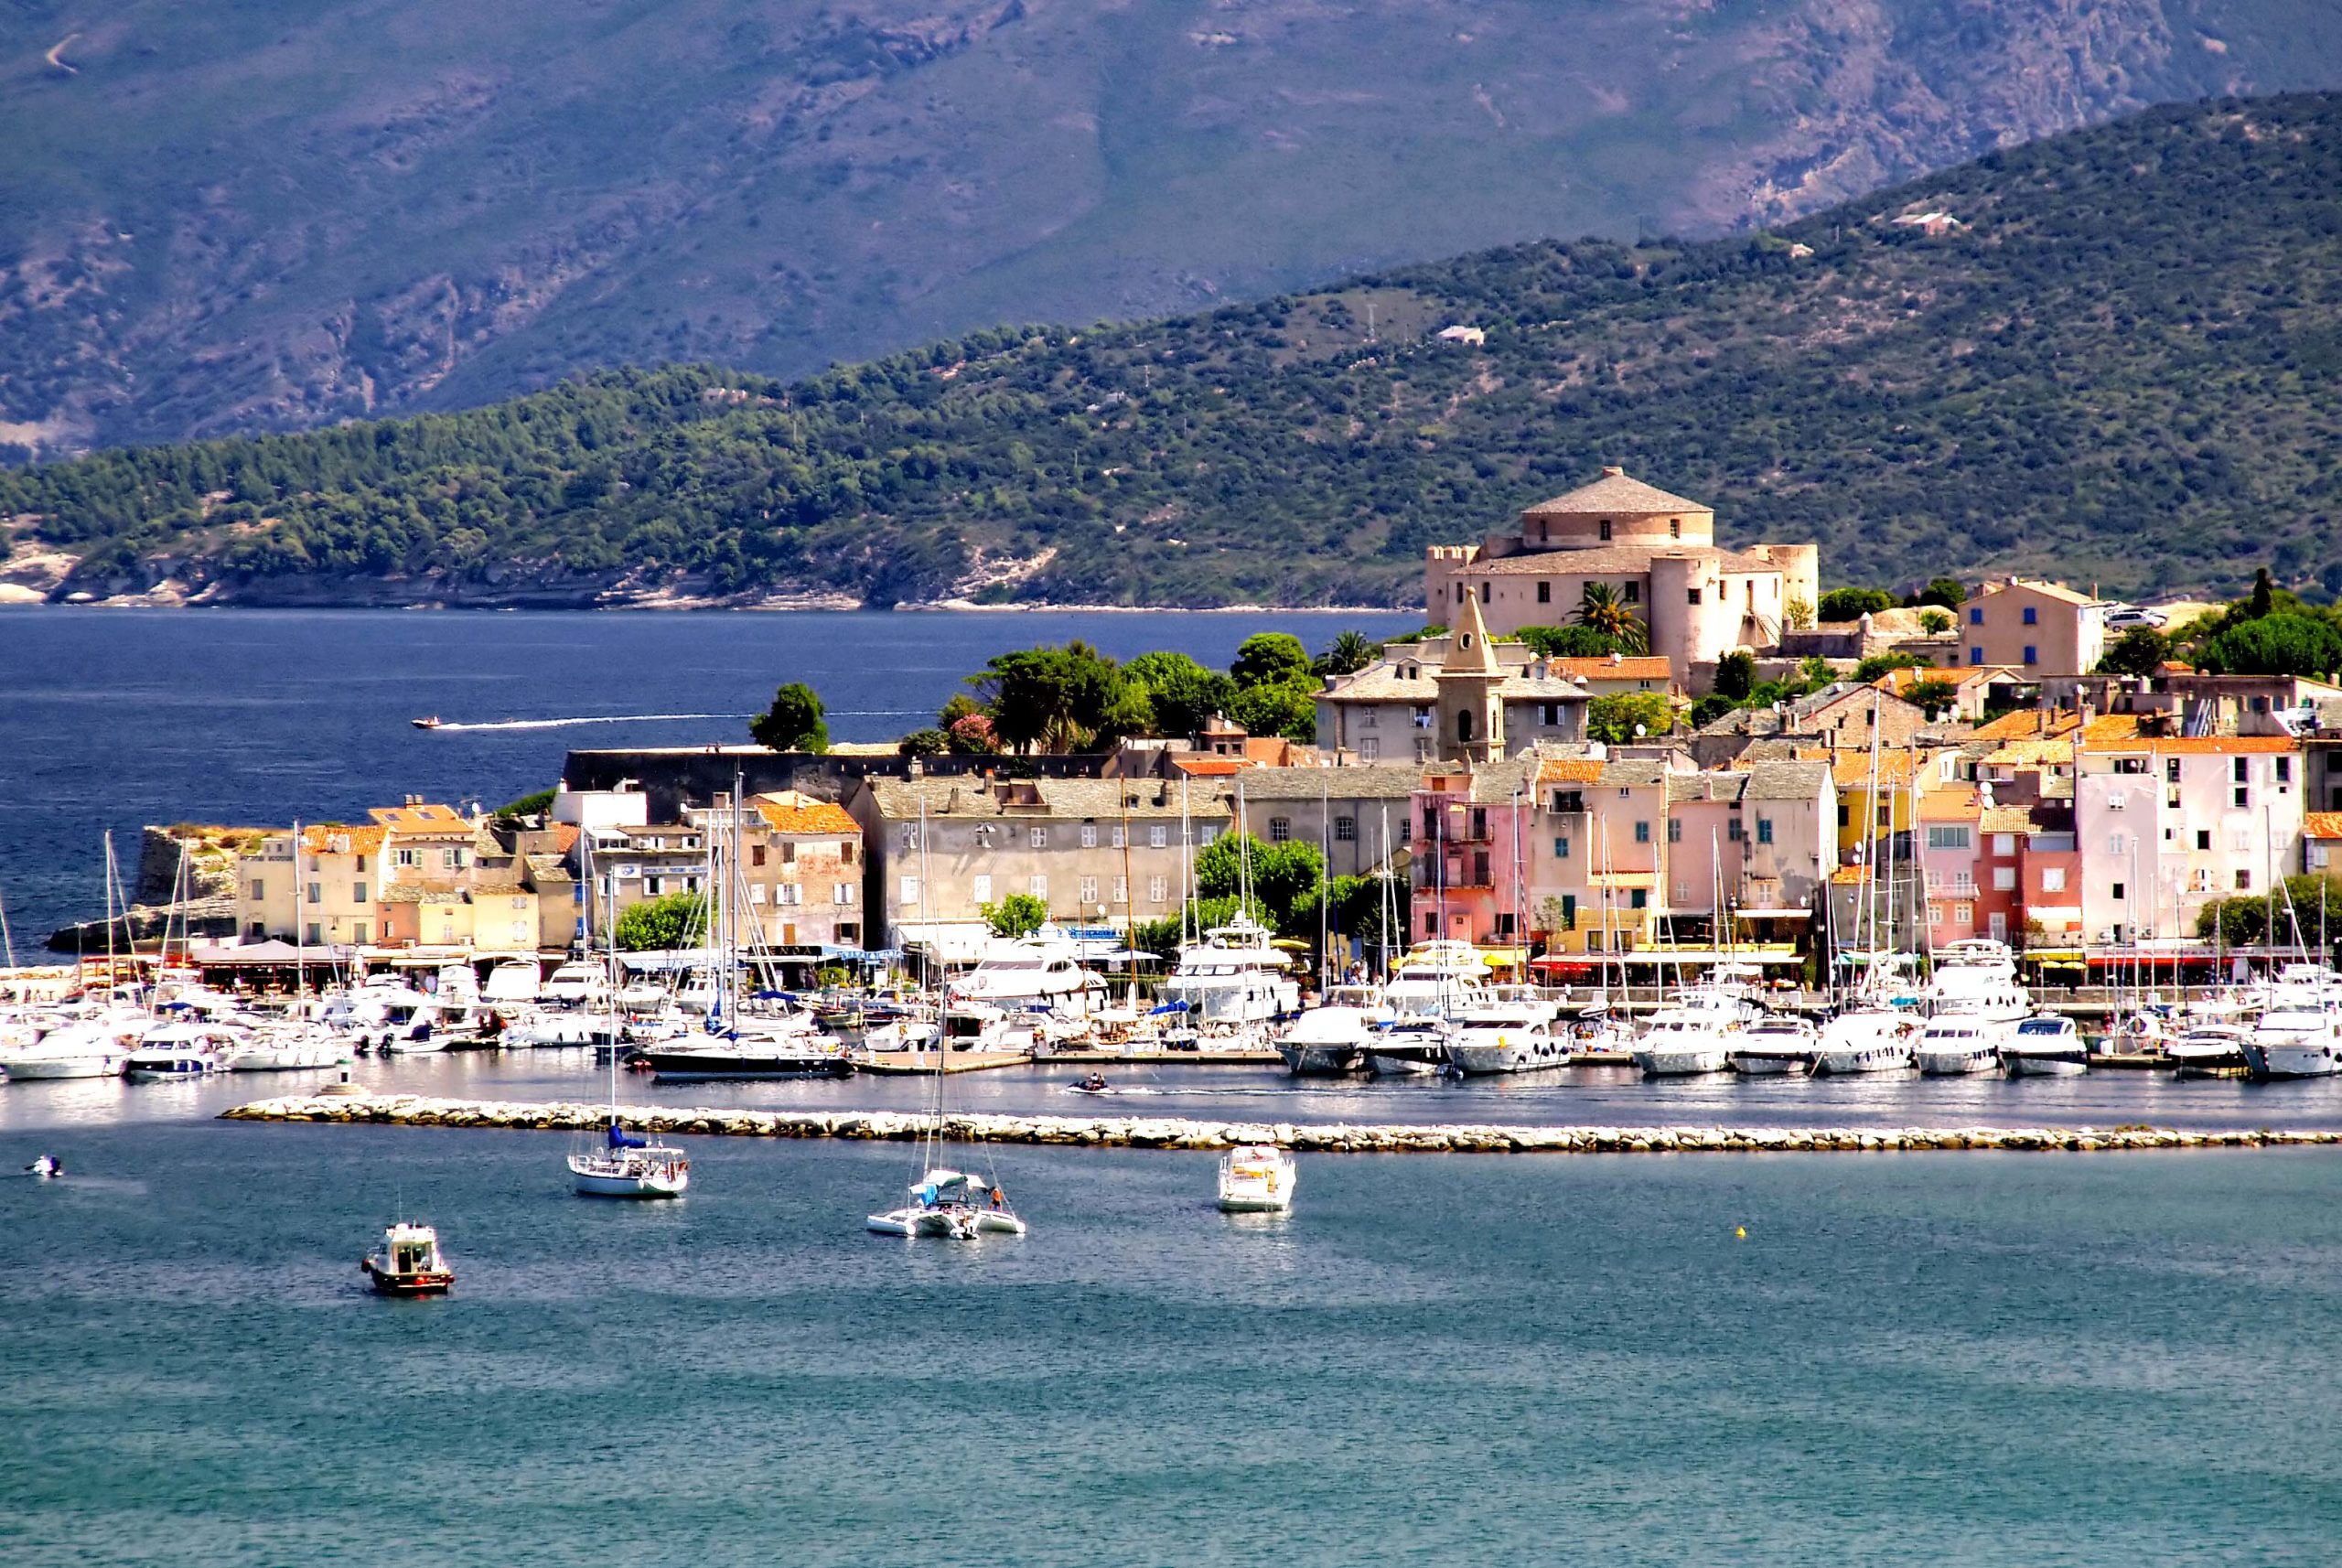 Villages in France - Saint-Florent © Pierre Bona - licence [CC BY-SA 3.0] from Wikimedia Commons